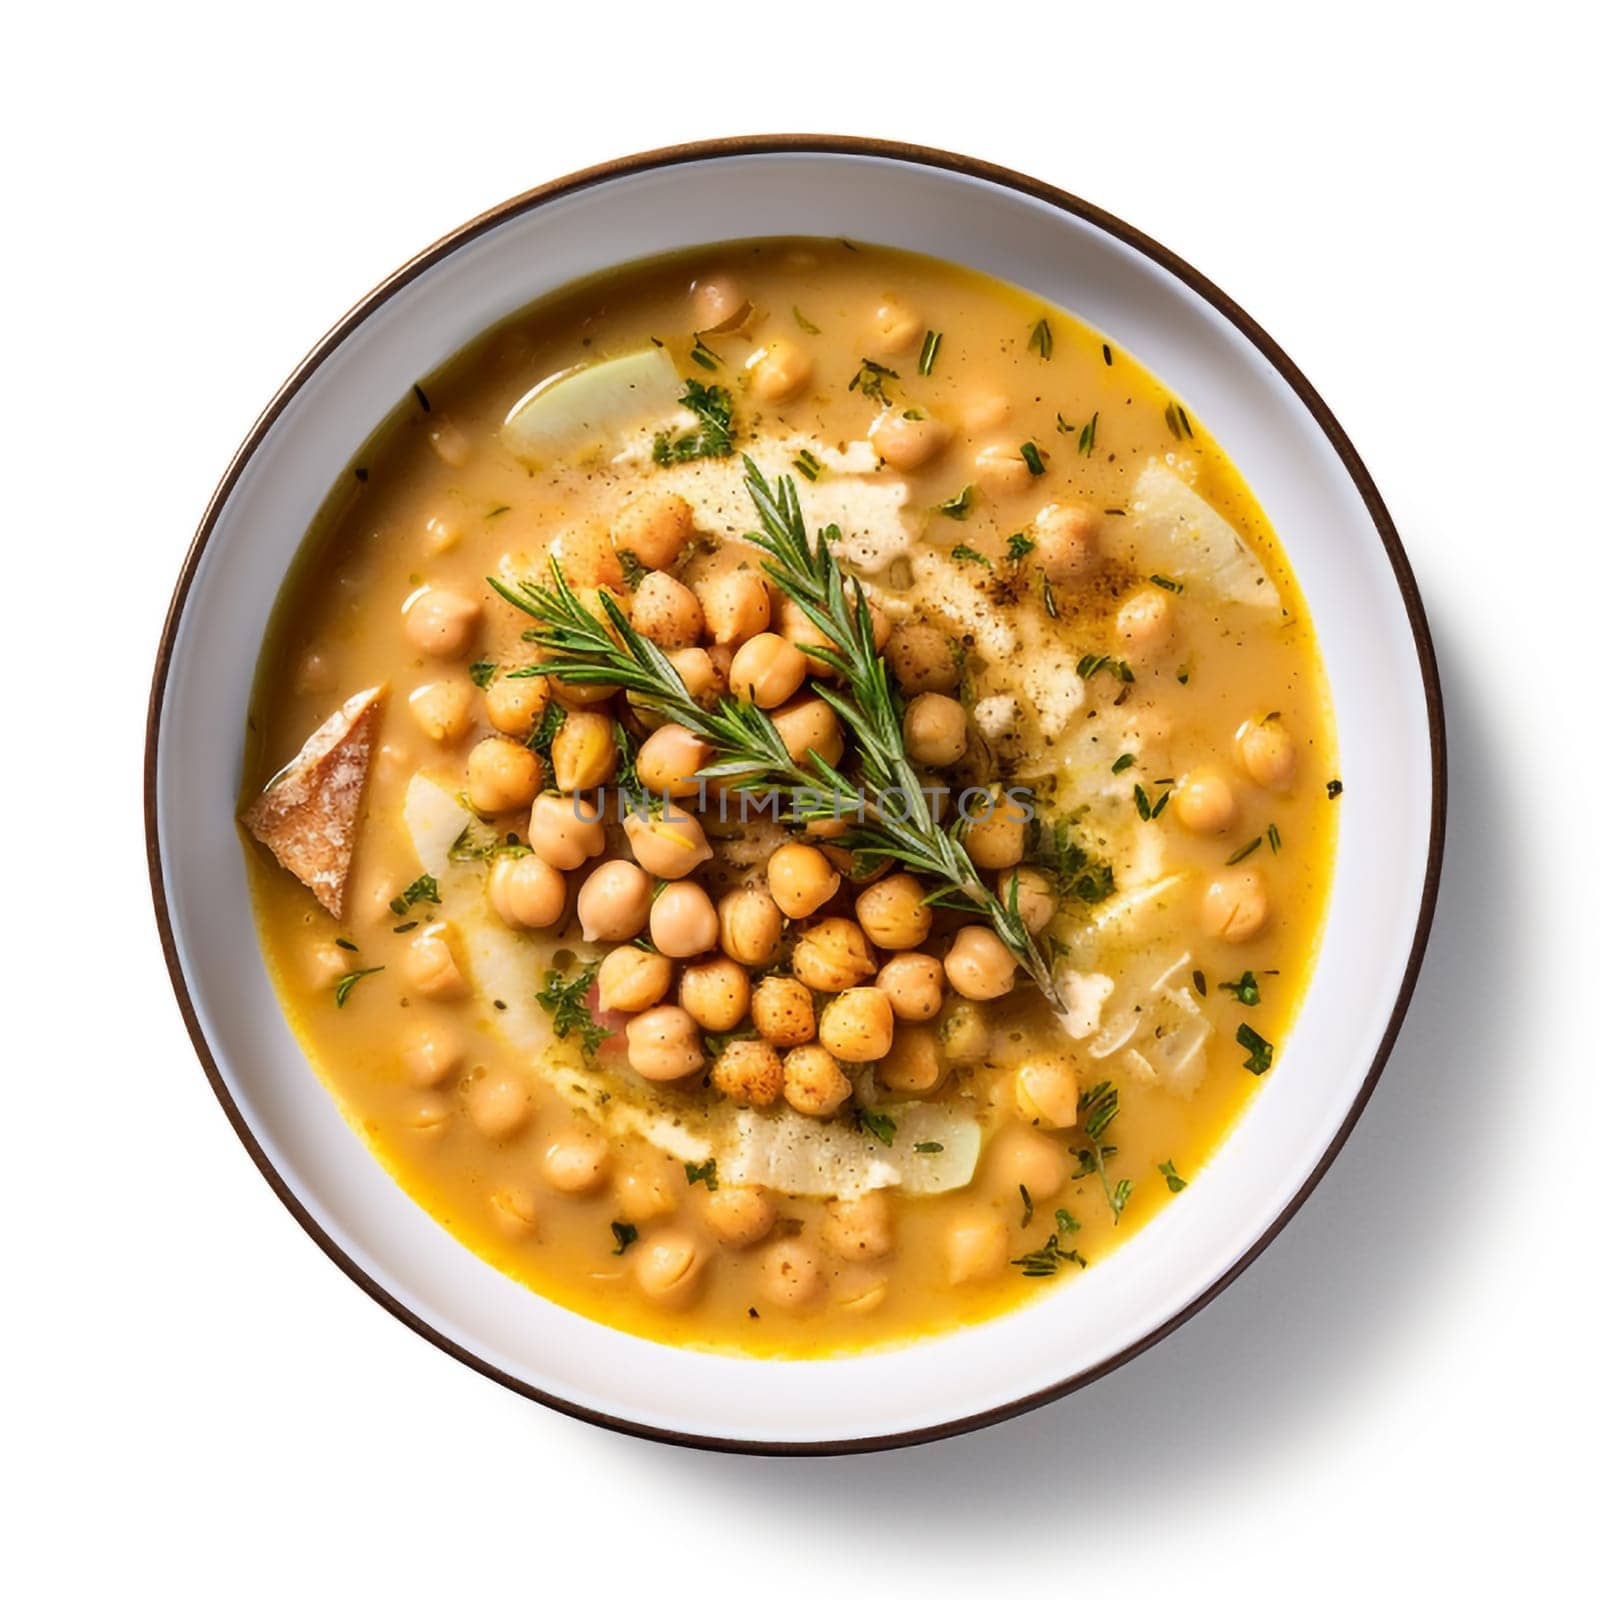 Chickpea soup, traditional Italian winter dish, in Umbria. A warm and nourishing soup made with chickpeas and flavors such as rosemary and garlic. on a white plate in a elegant restaurant decorated for Christmas time. Healthy vegetarian food